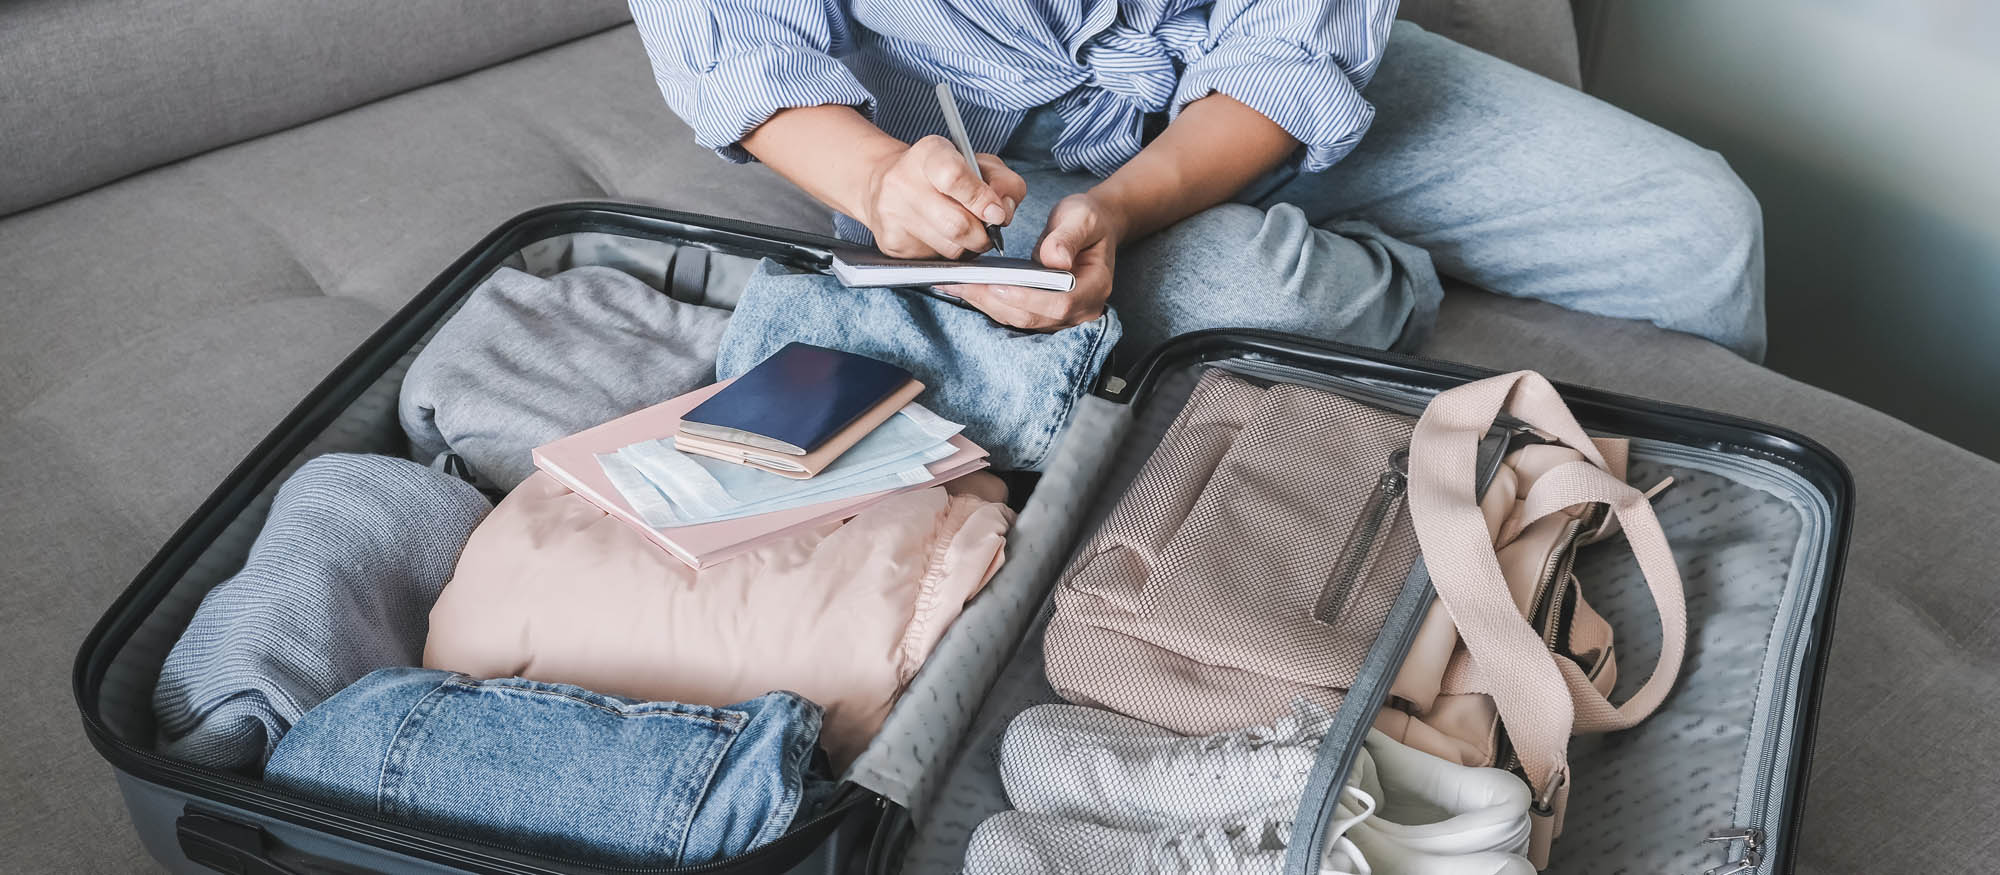 Already Packed - Why You Need to Plan Your Travel Outfits